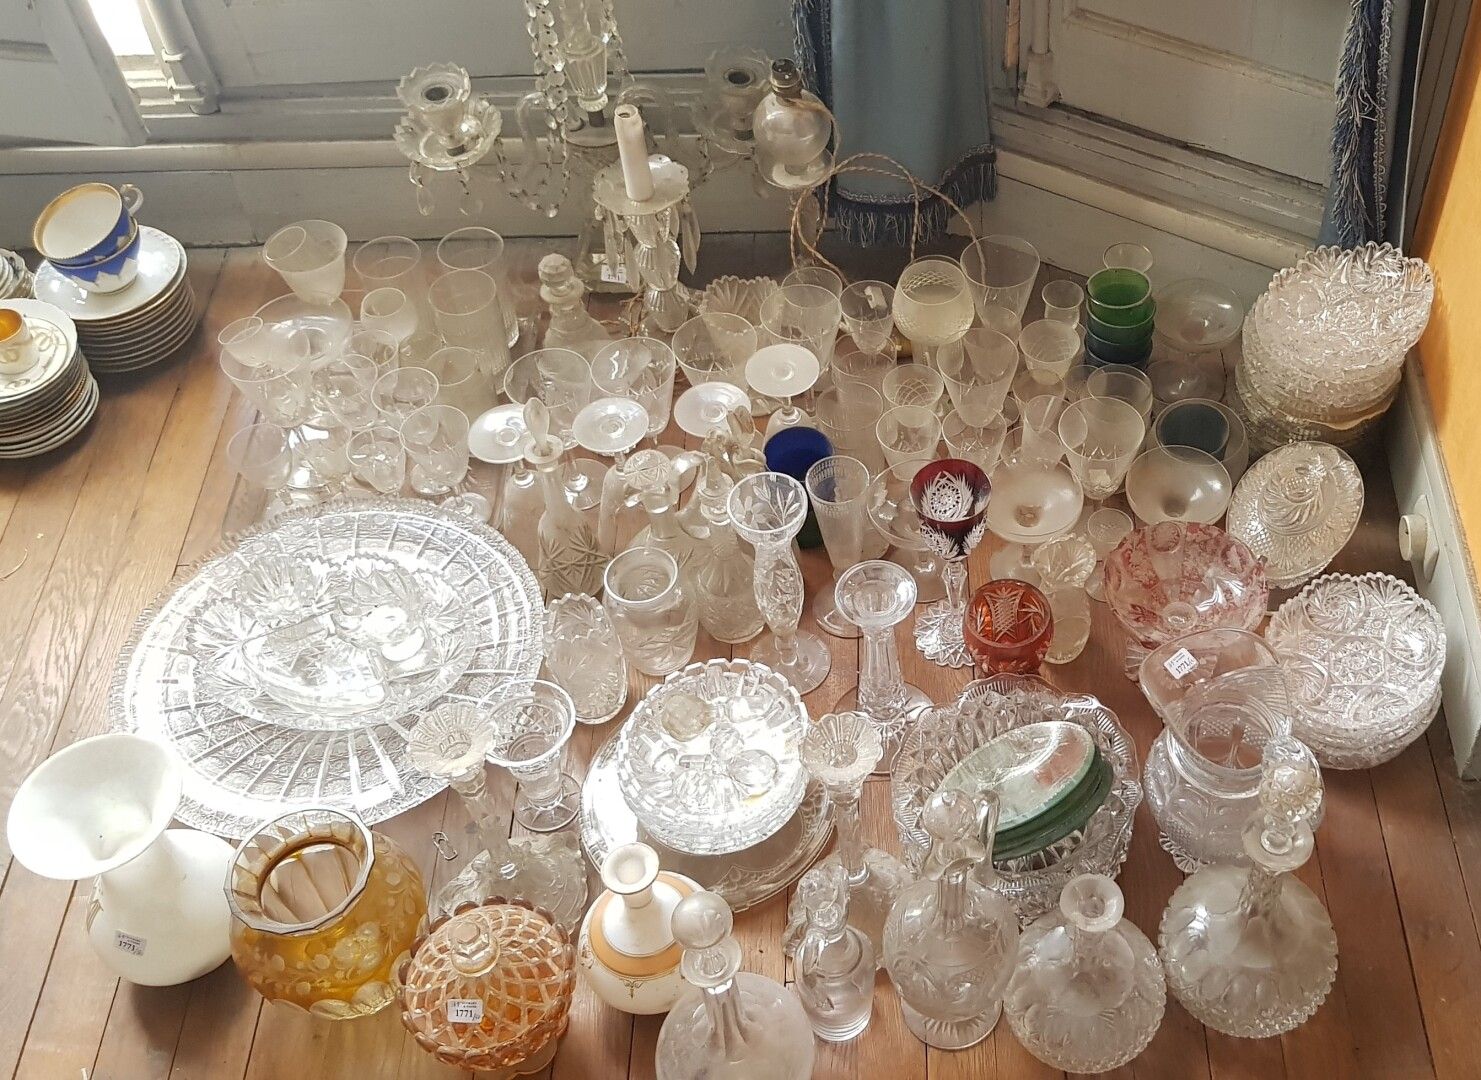 Null Lot of glassware and crystal including :

Parts of glass service

Vases

Bo&hellip;